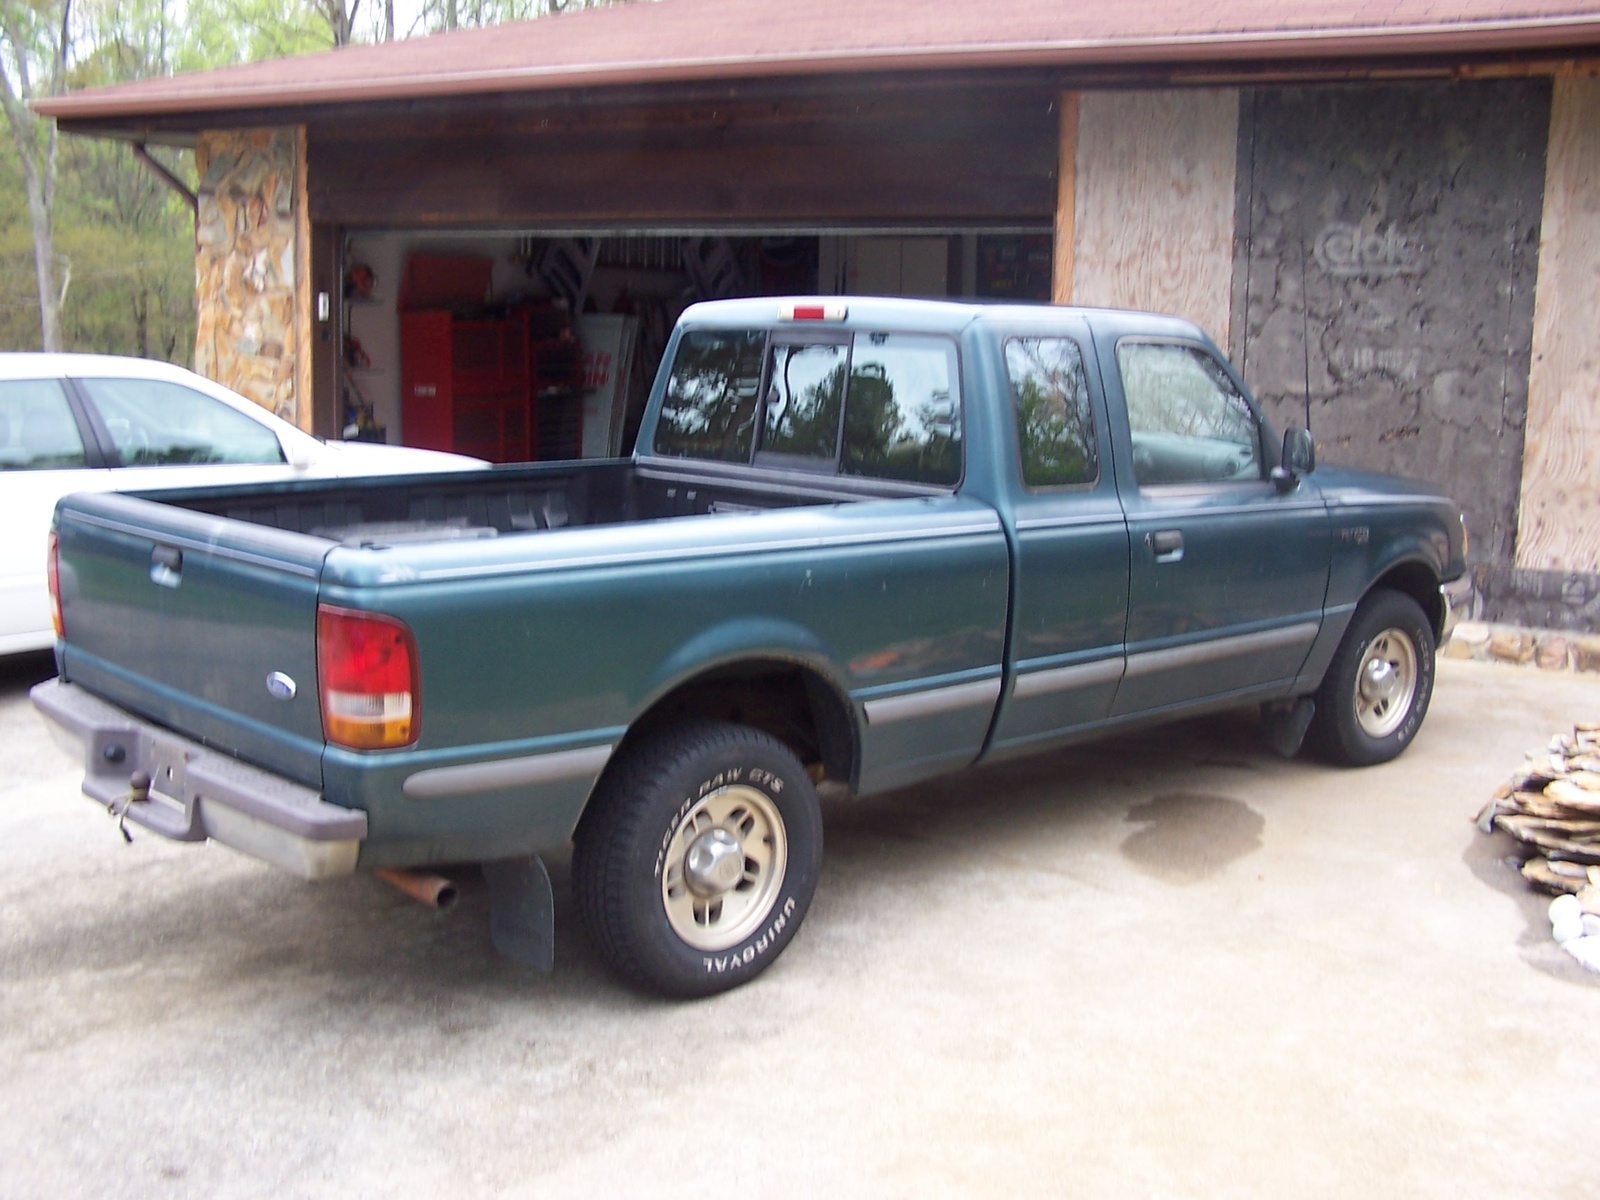 Weight 1996 ford ranger extended cab #7